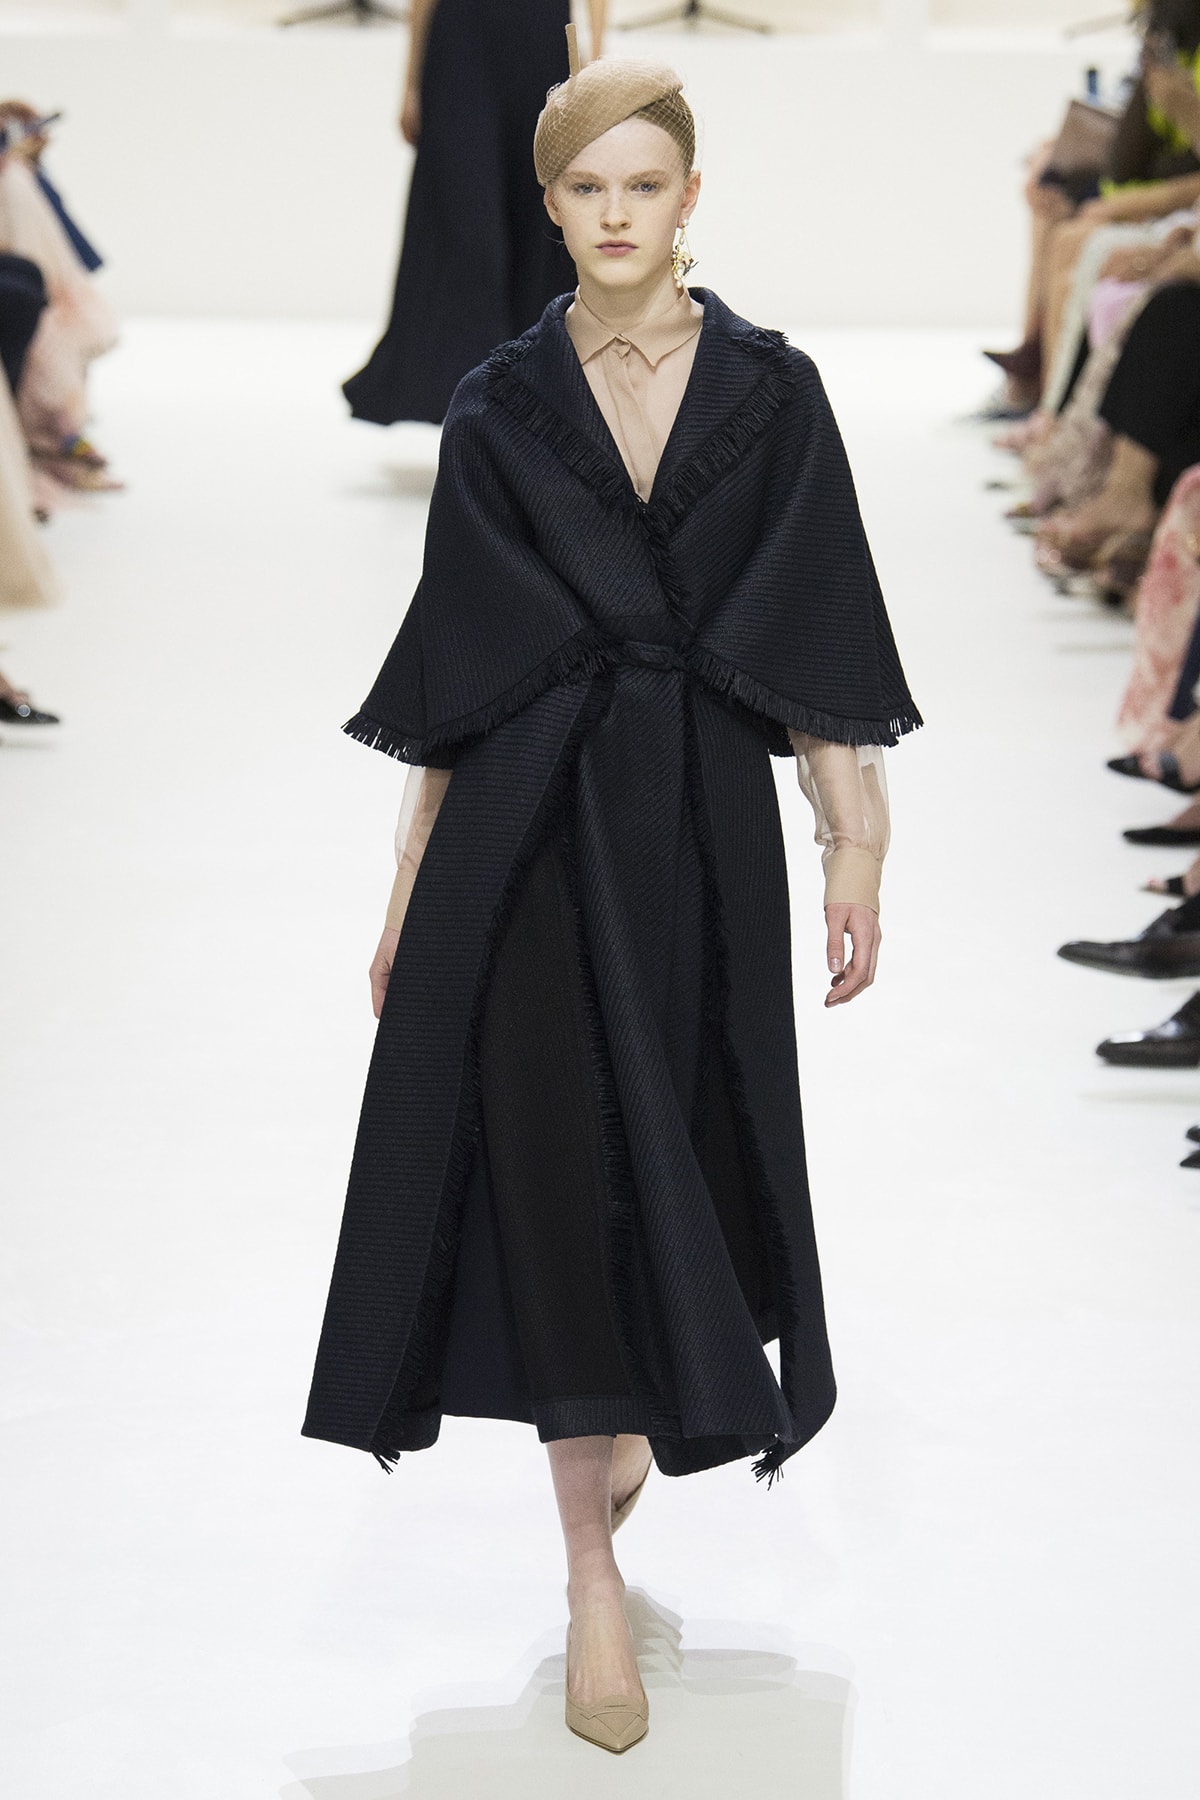 Christian Dior Fall 2018 Couture Show Collection